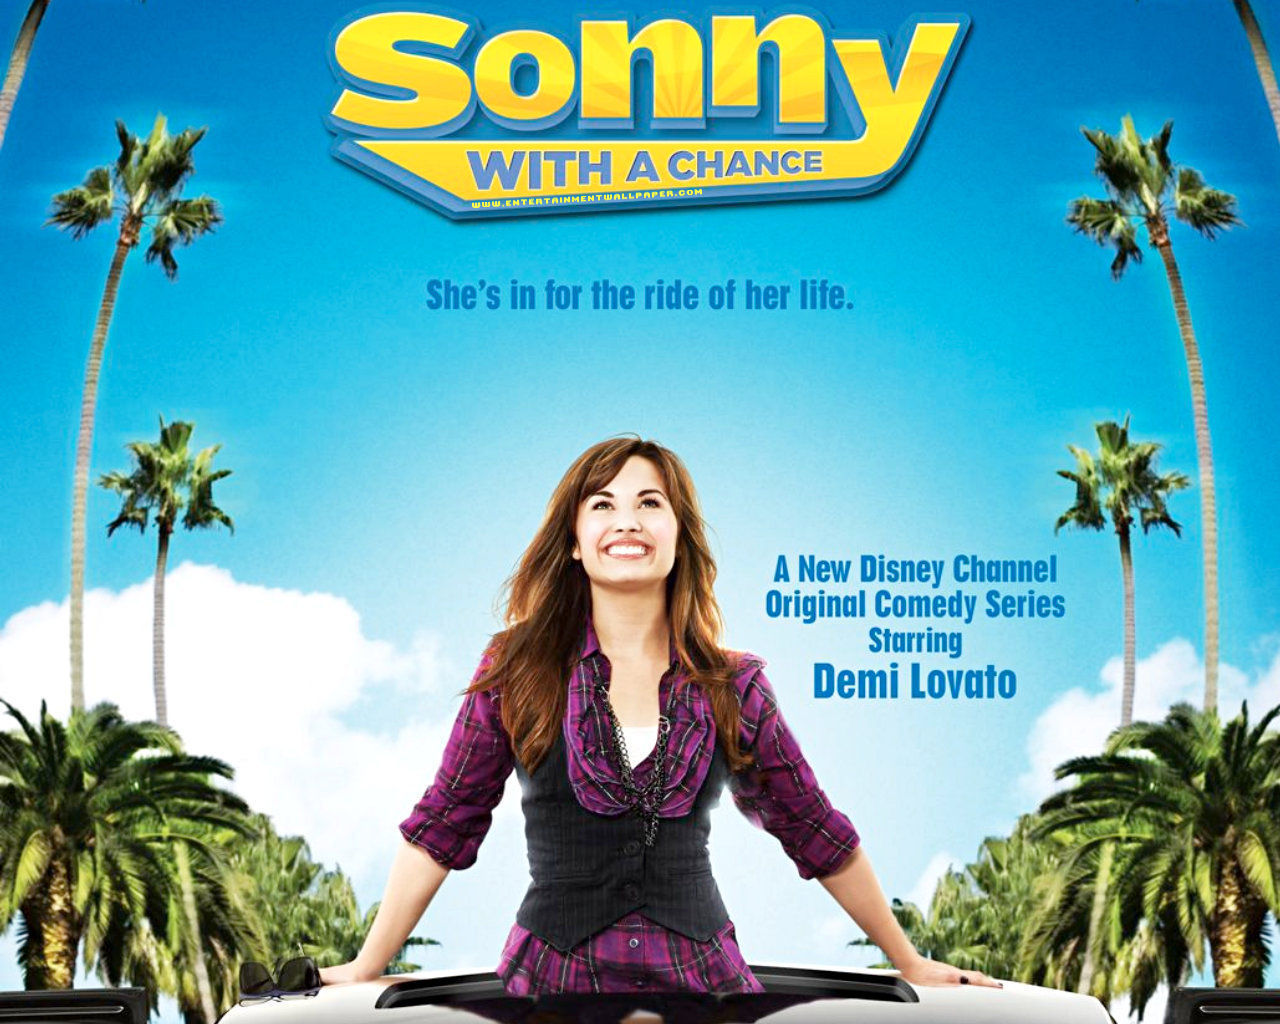 sonny-sonny-with-a-chance-17914602-1280-1024